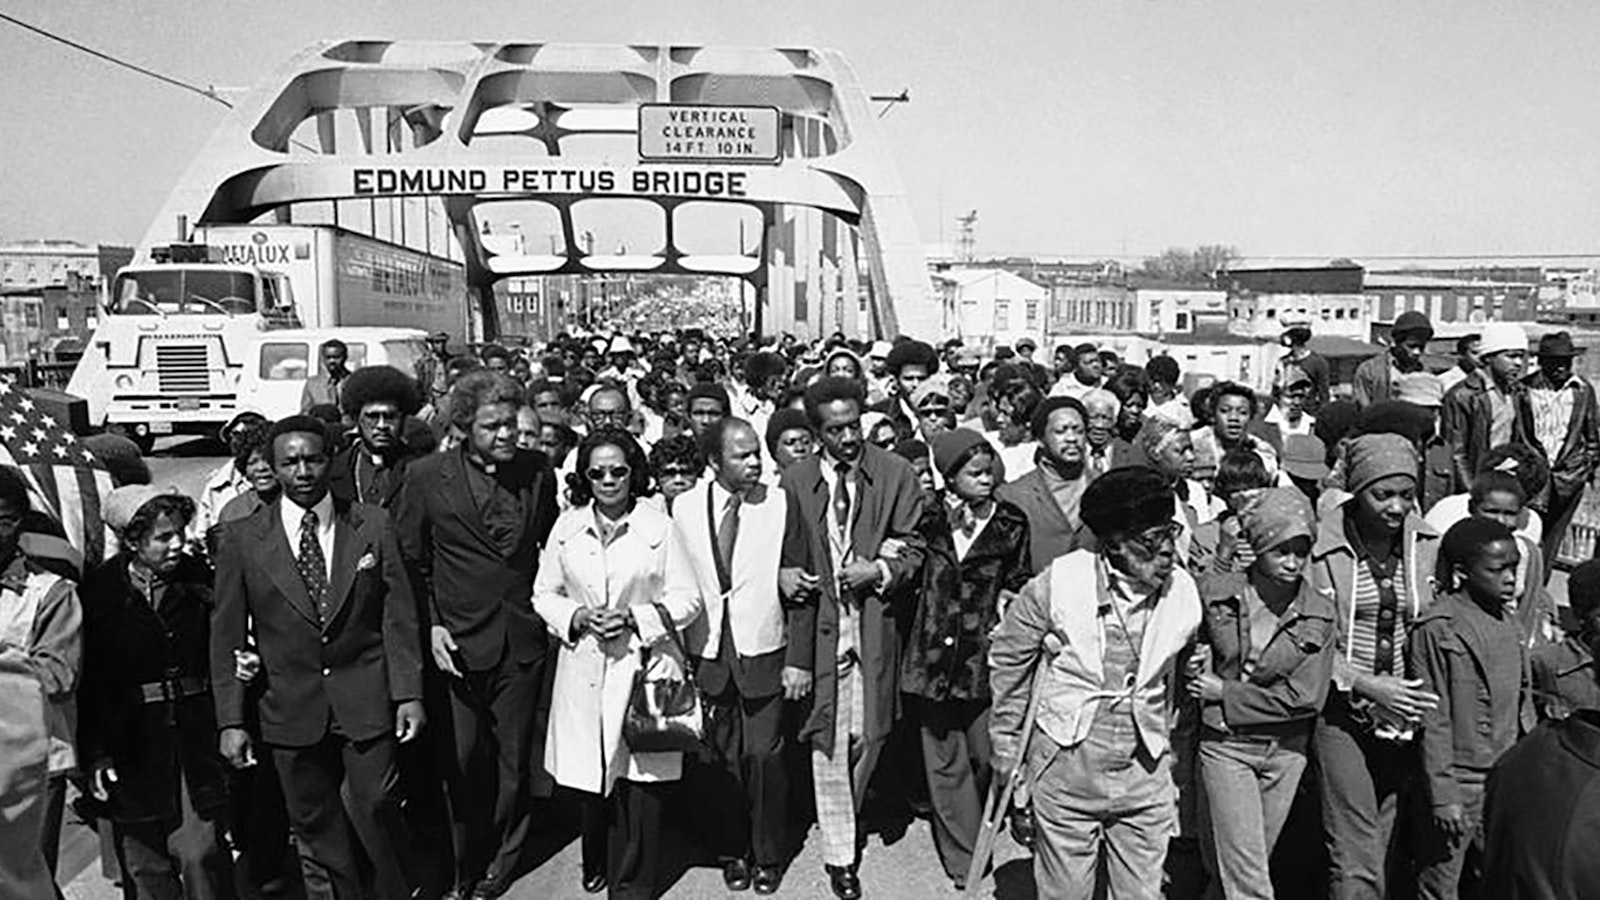 Black and white photo of a group of people marching across a bridge